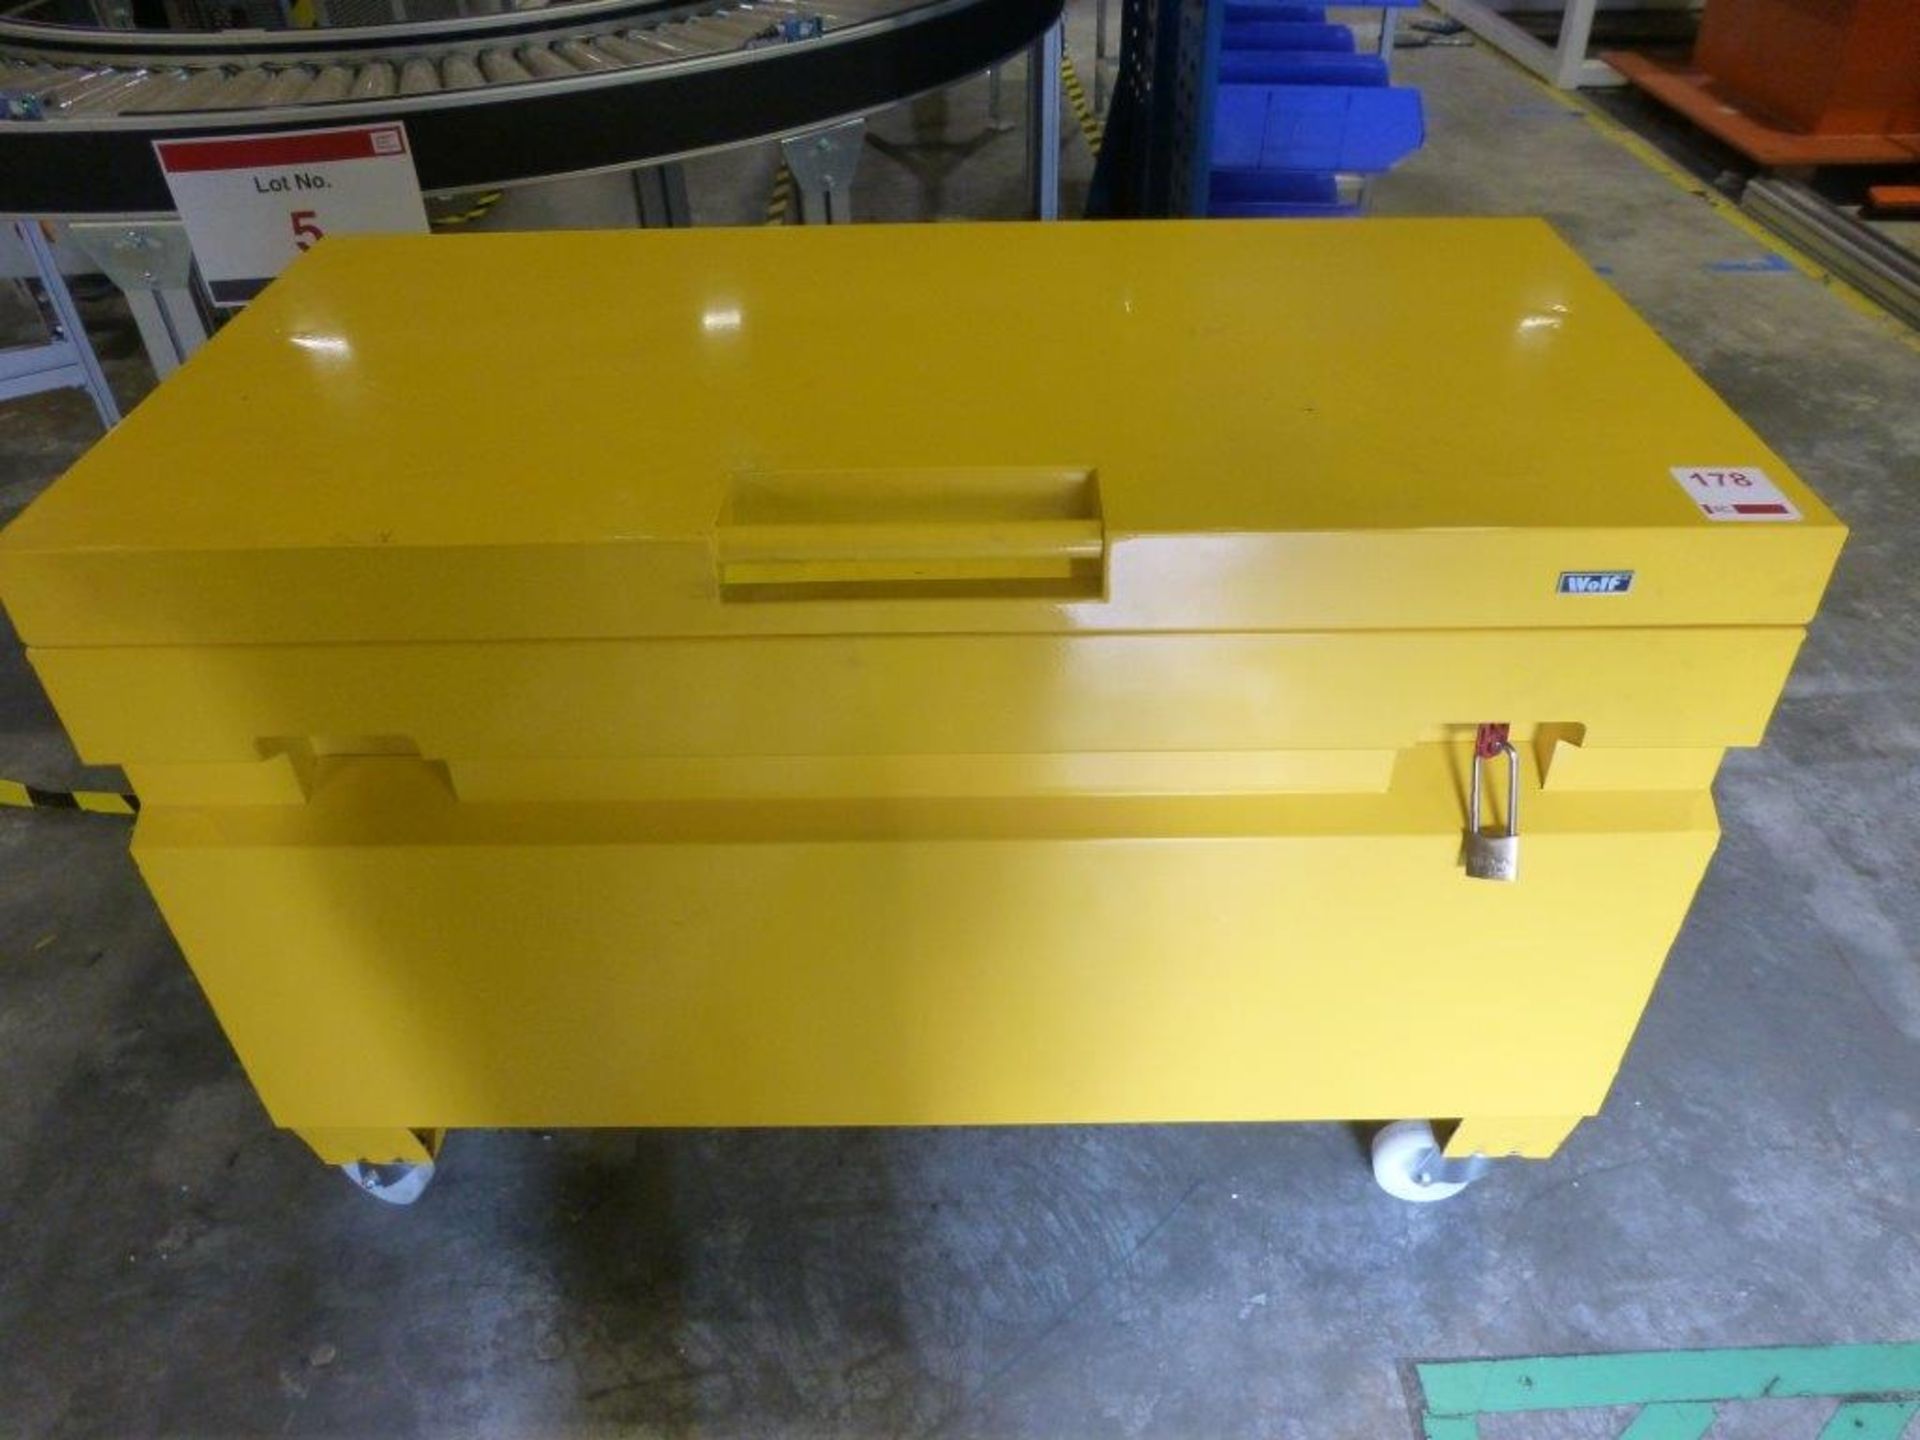 Wolf mobile tool vault, overall dimensions 1220mm x 610mm x 850mm